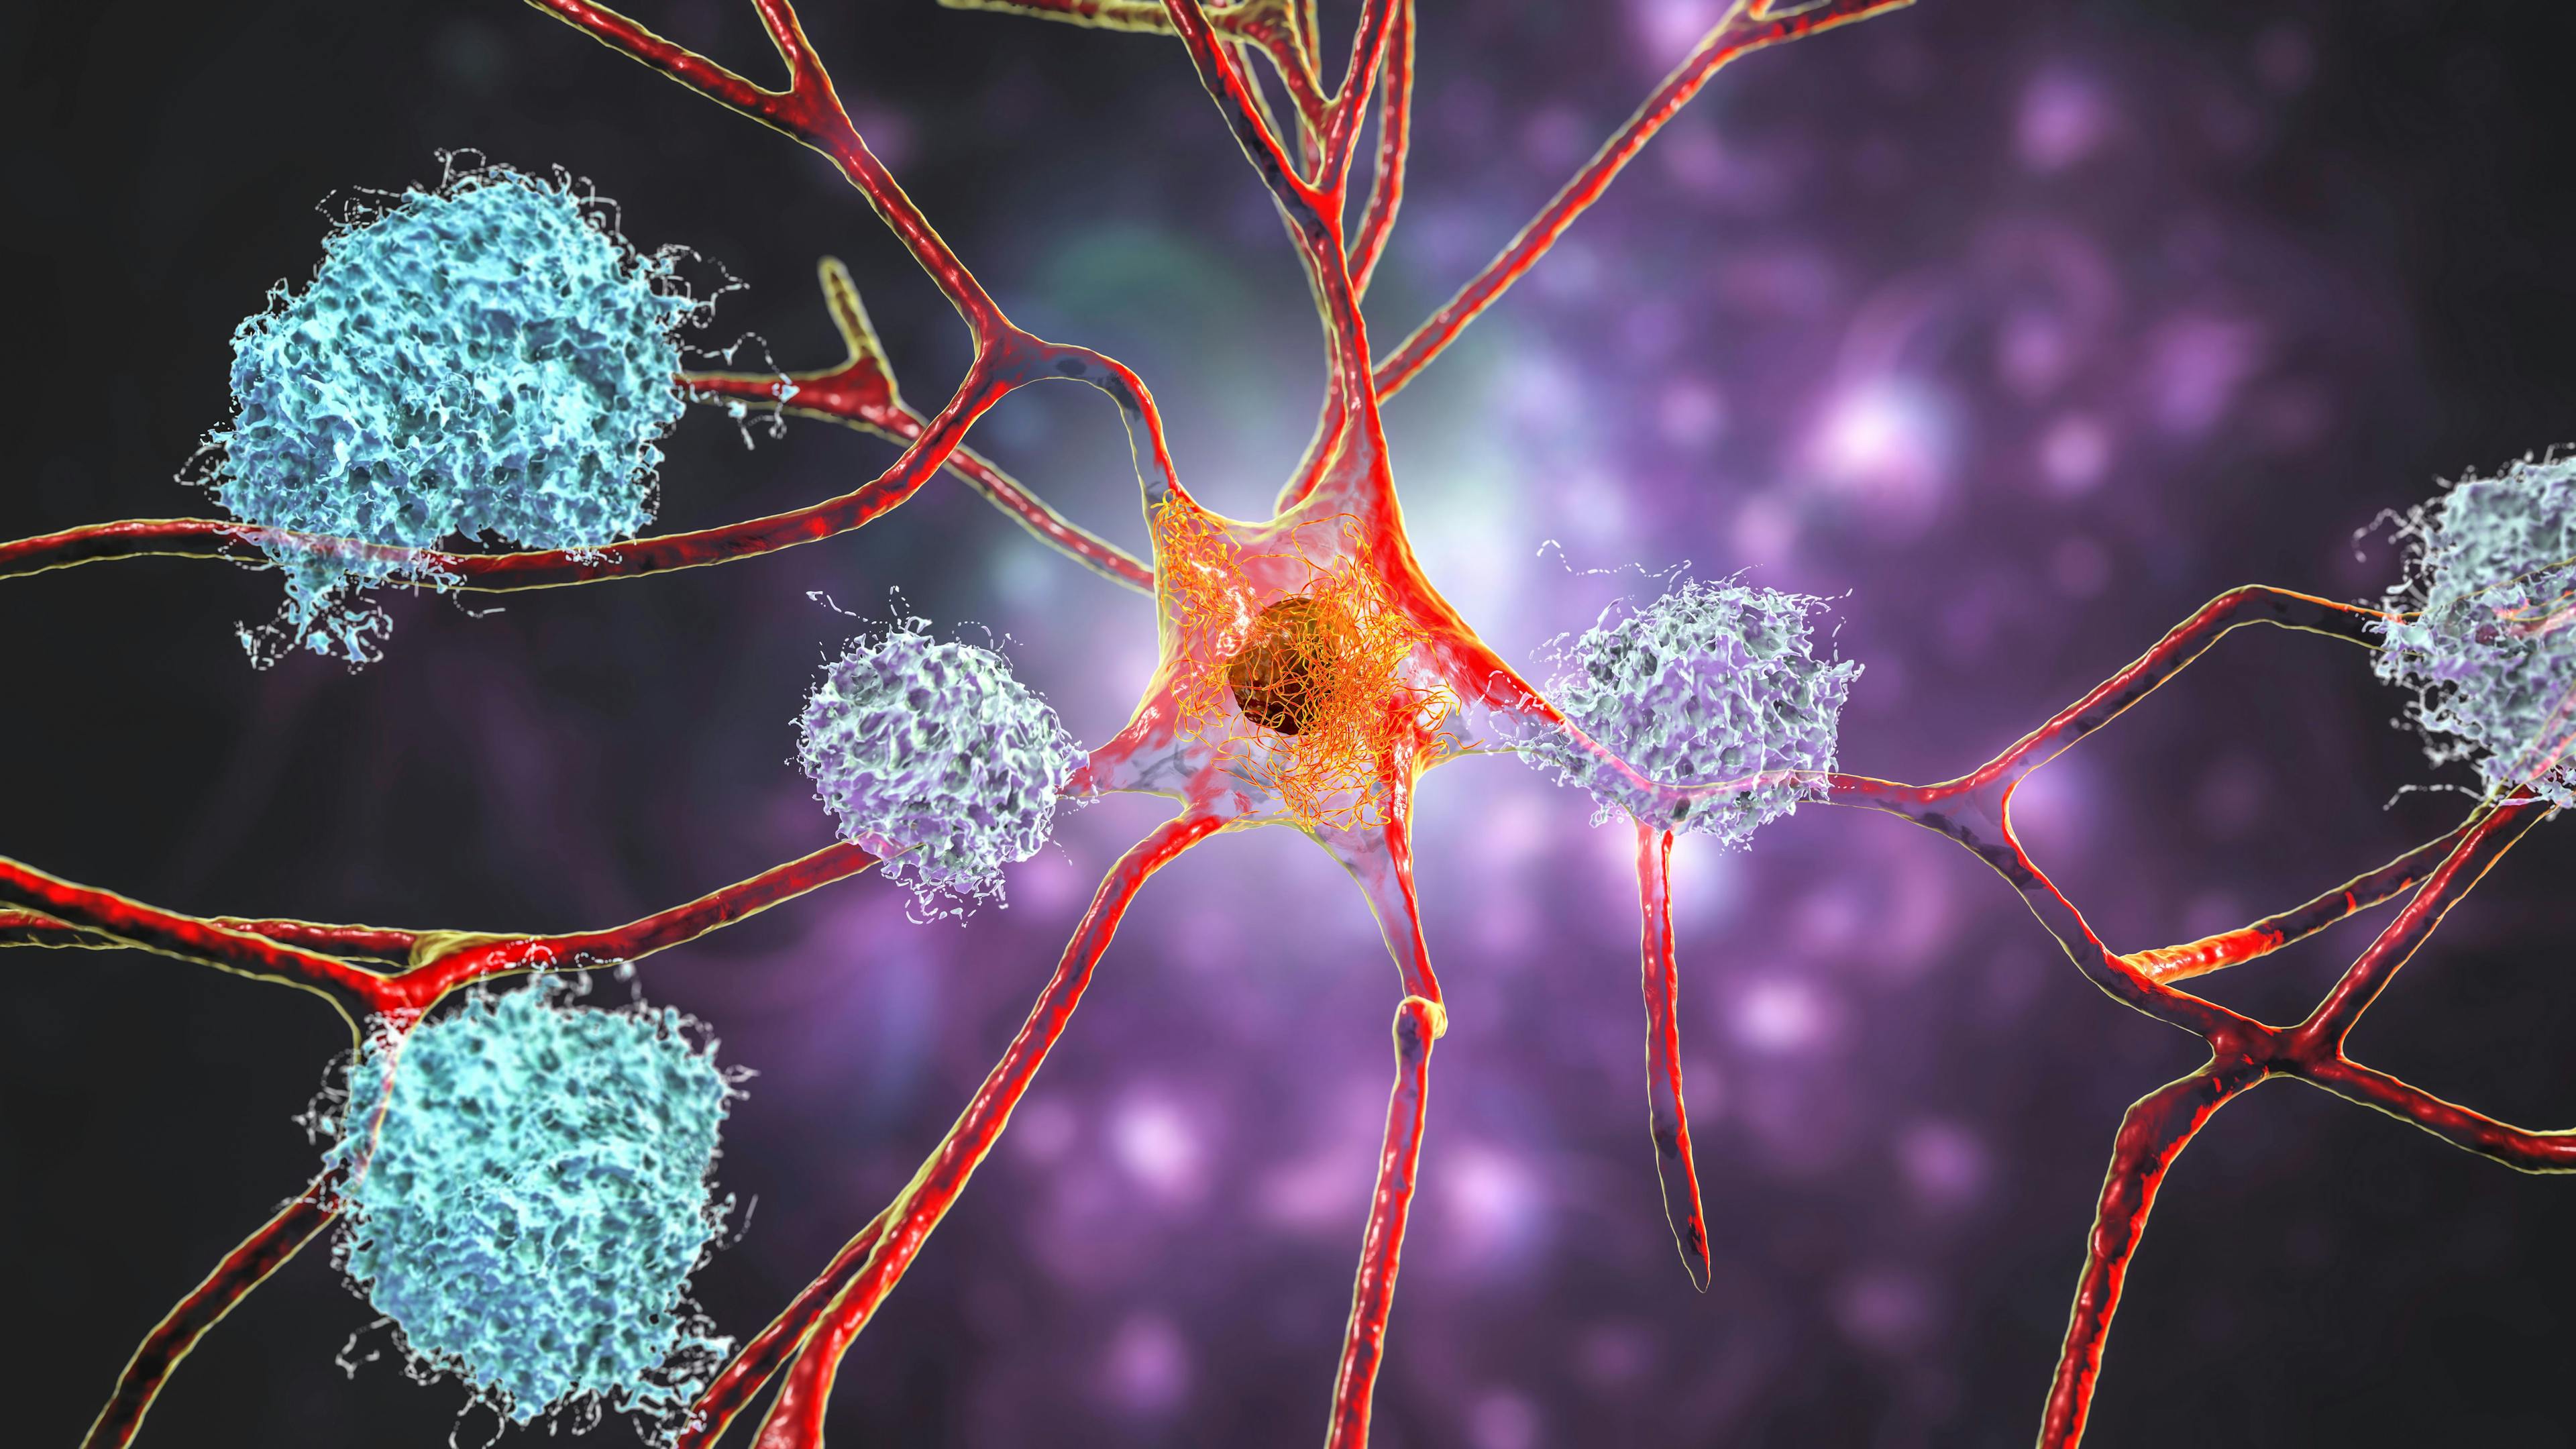 Neurons in Alzheimer's disease. Illustration showing amyloid plaques in brain tissue | Image Credit: © Dr_Microbe - stock.adobe.com